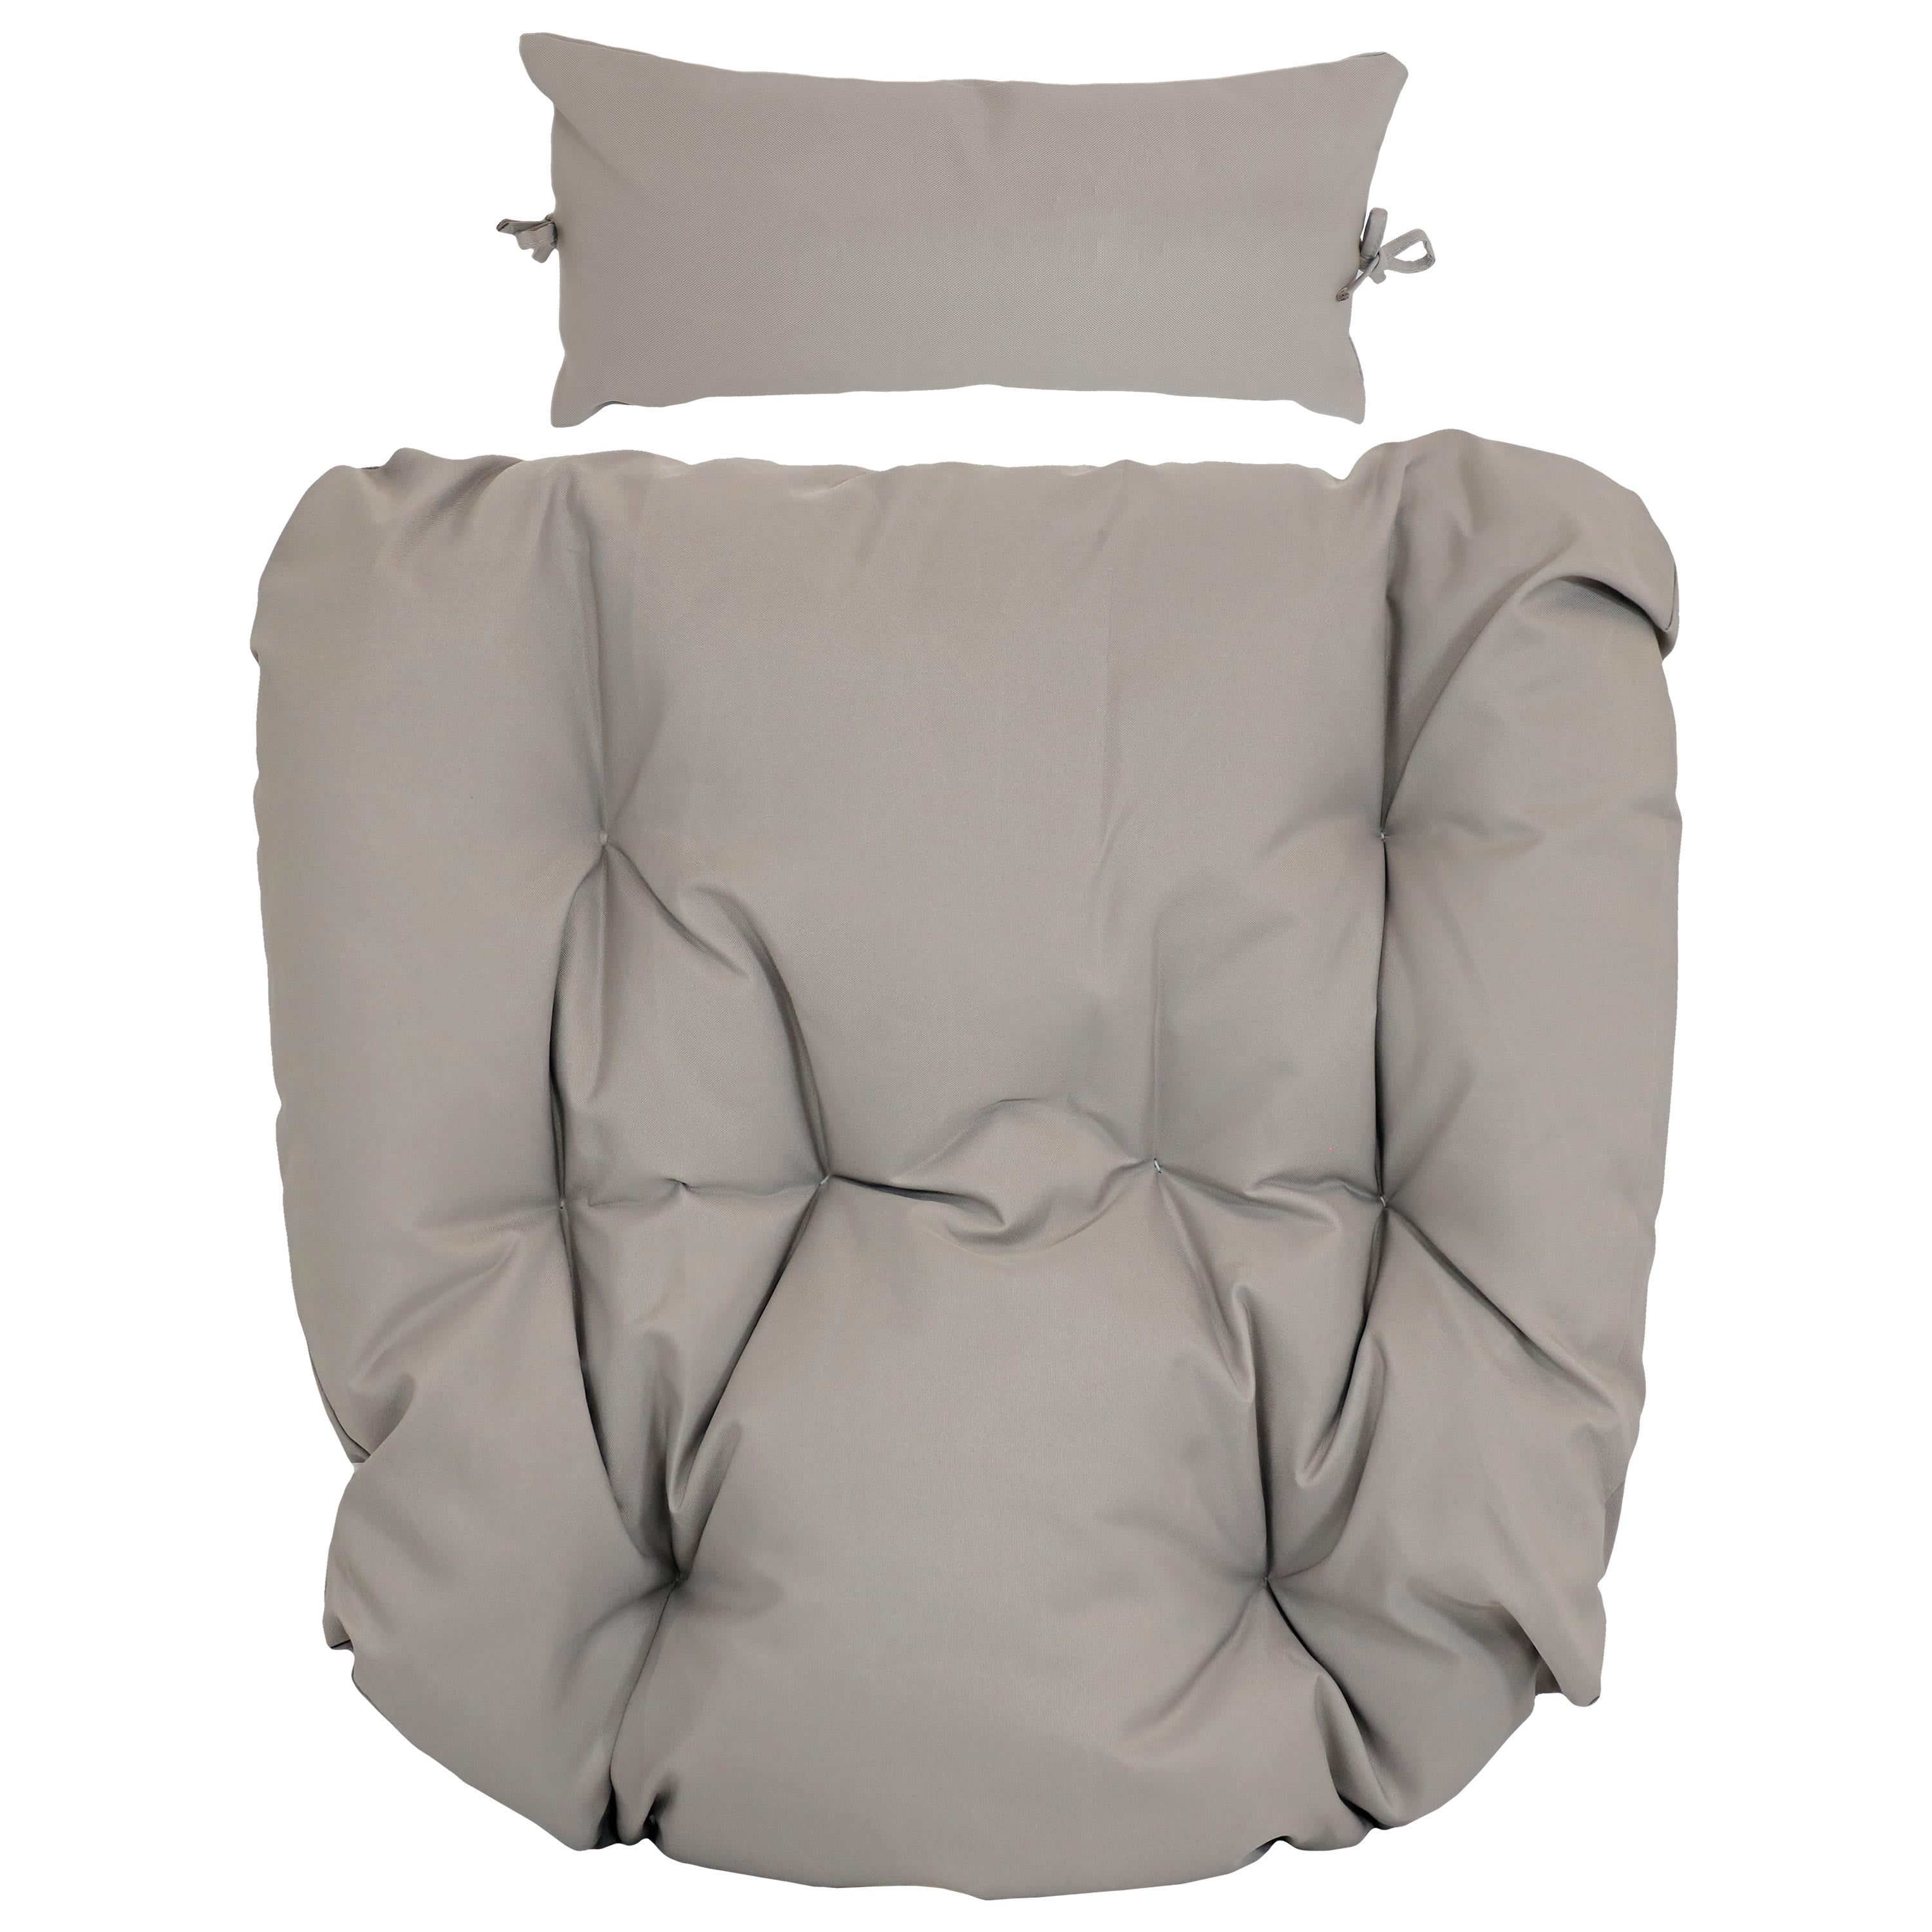 Sunnydaze Egg Chair Cushion Replacement with Head Pillow